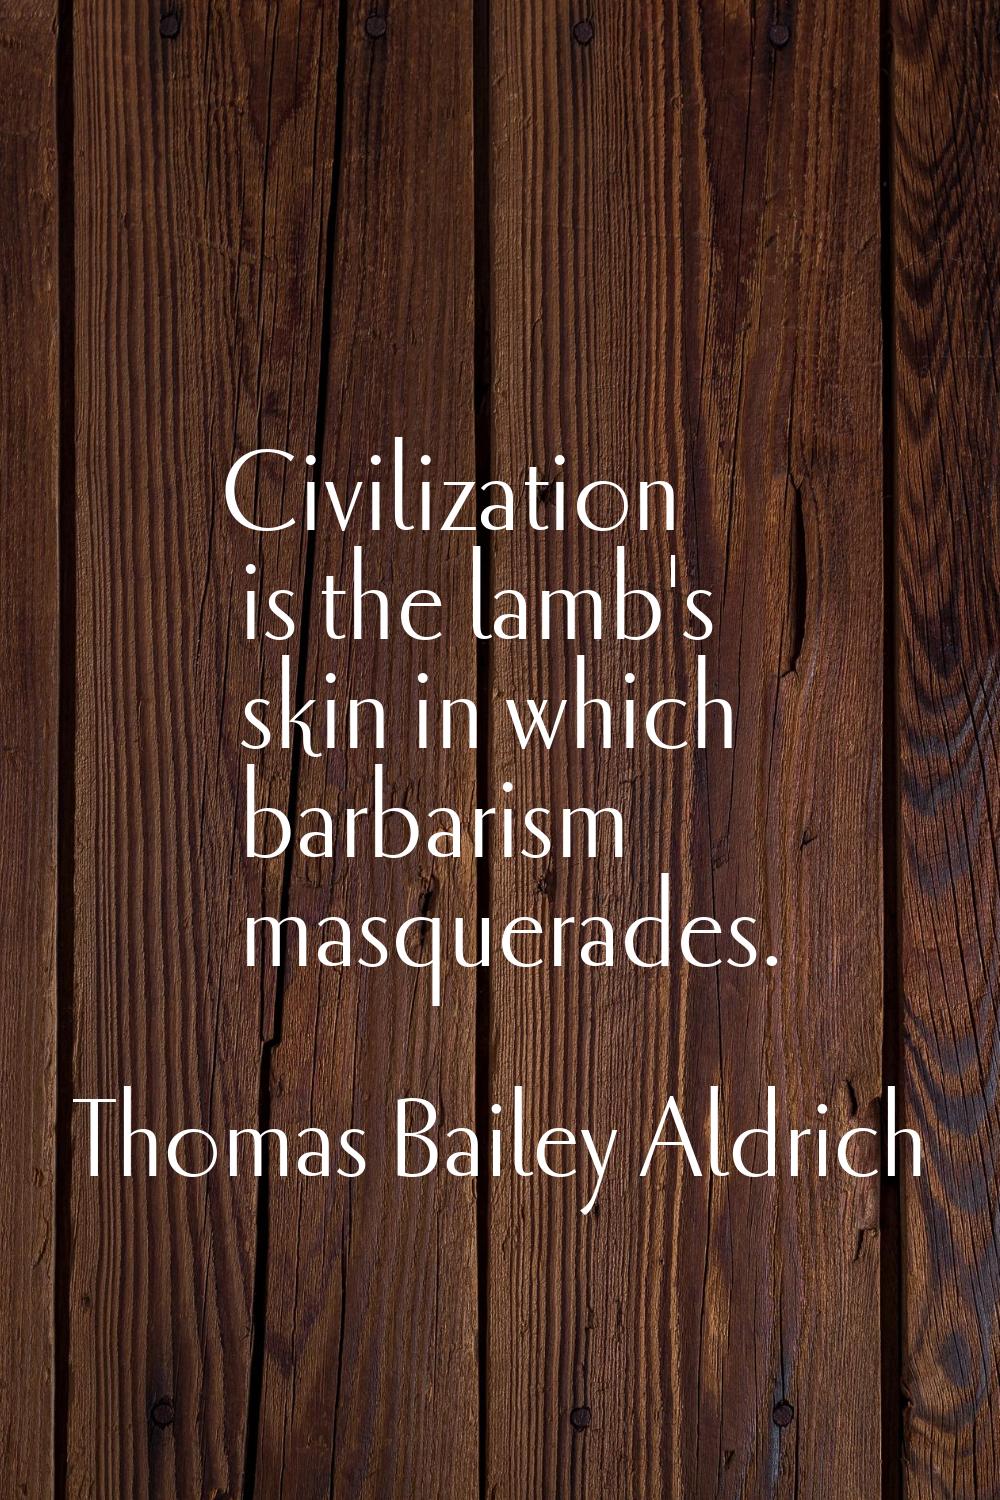 Civilization is the lamb's skin in which barbarism masquerades.